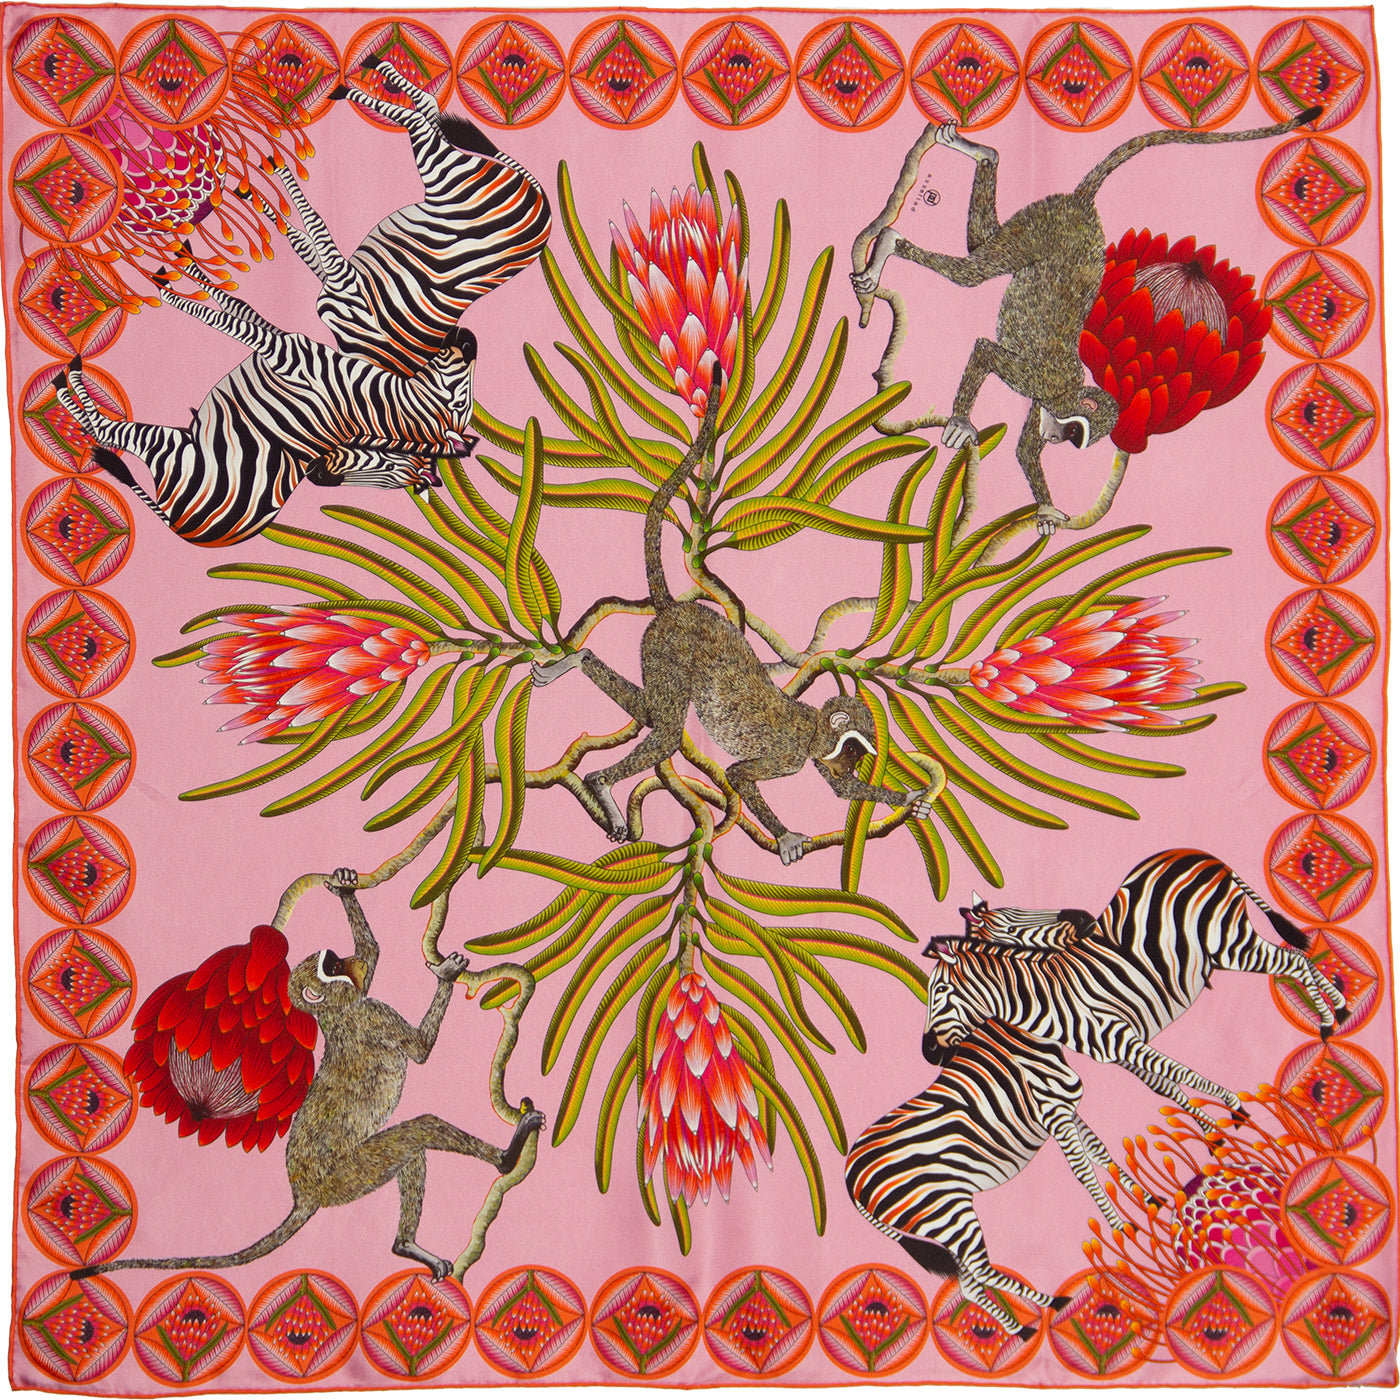 Pink silk scarf with Zebras Monkies and Protea flower